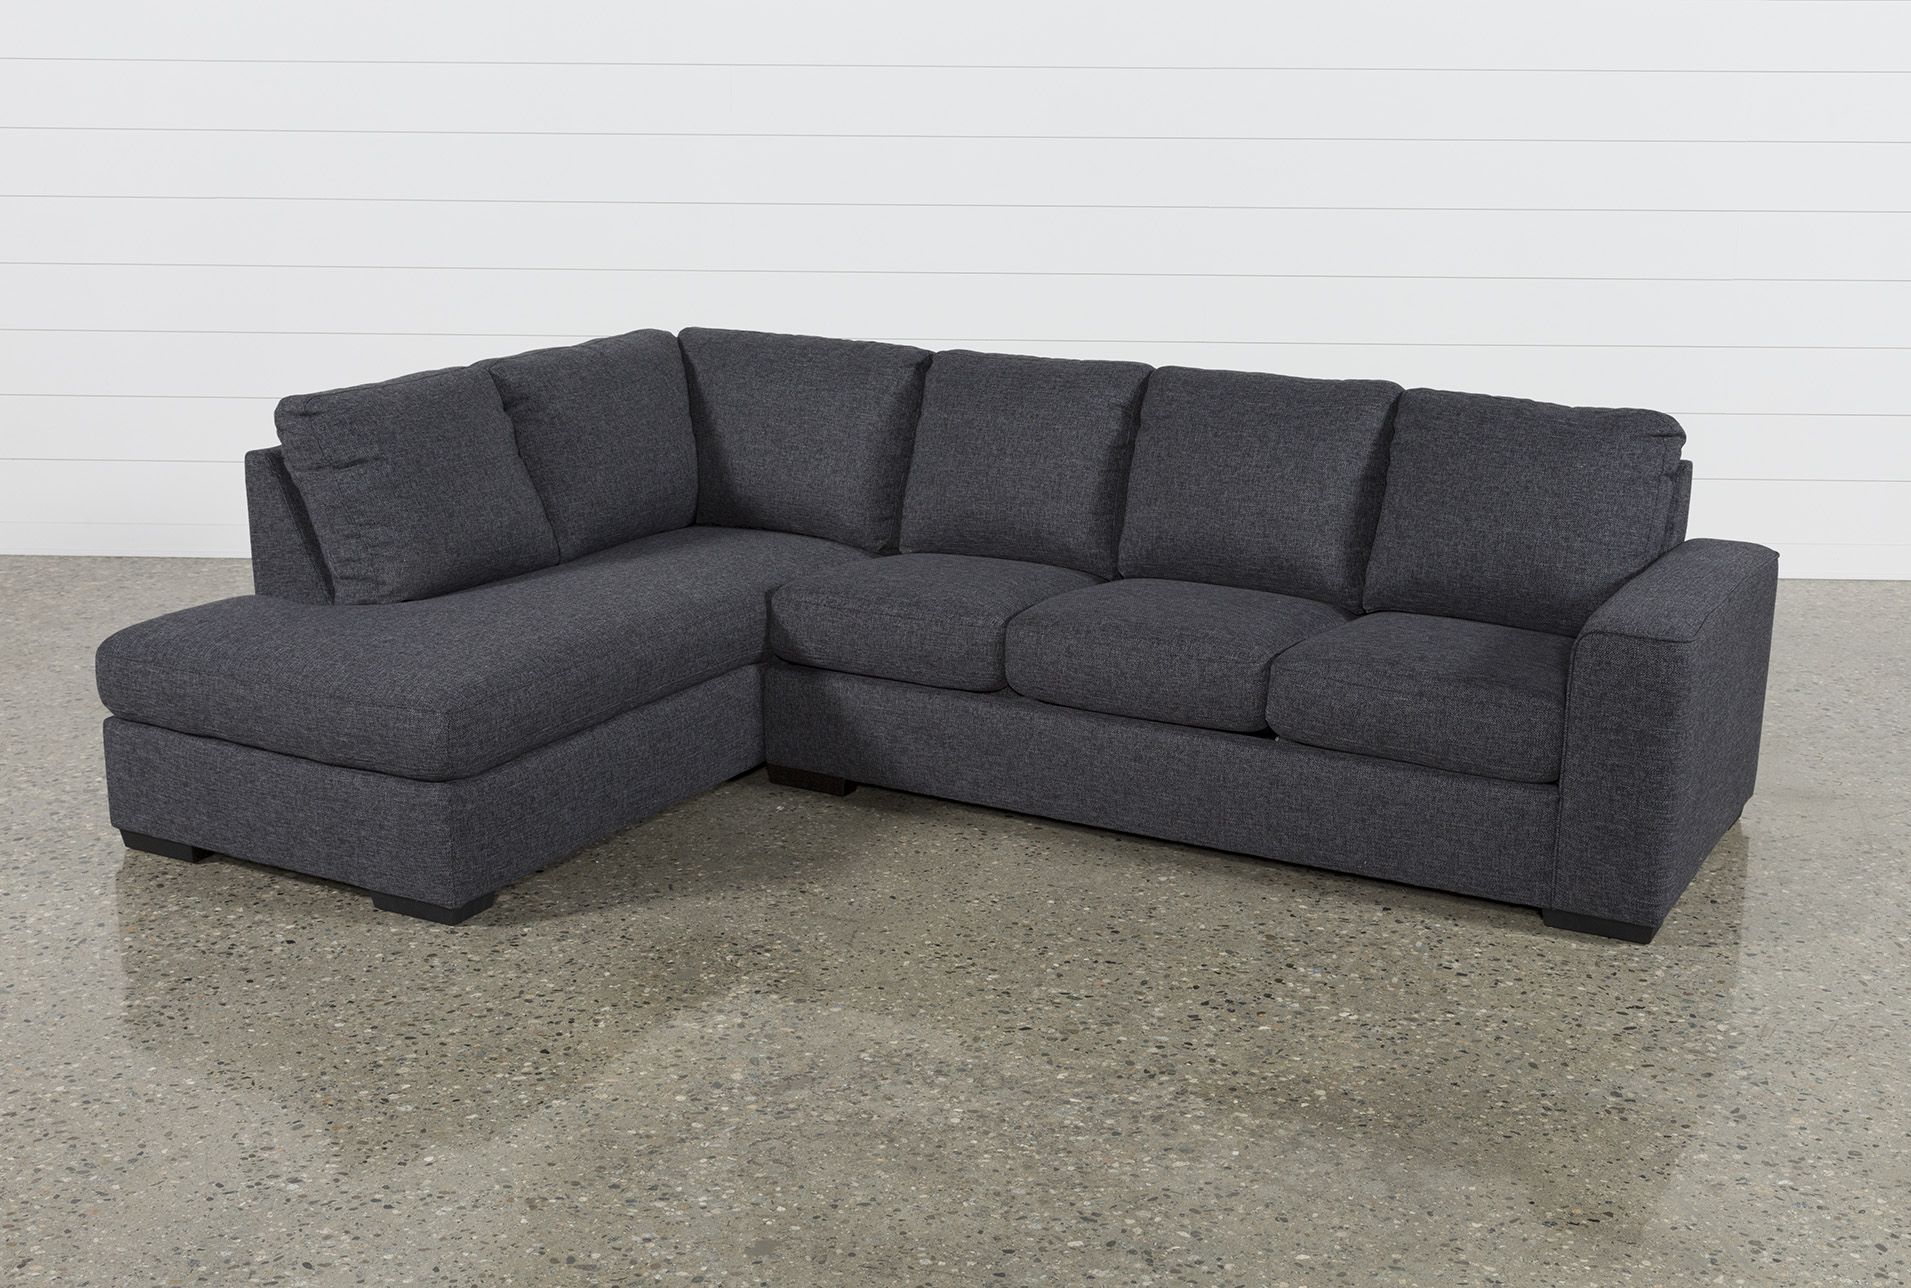 Lucy Dark Grey 2 Piece Sectional Sofa With Left Arm Facing Chaise Pertaining To Dark Gray Sectional Sofas (View 15 of 20)